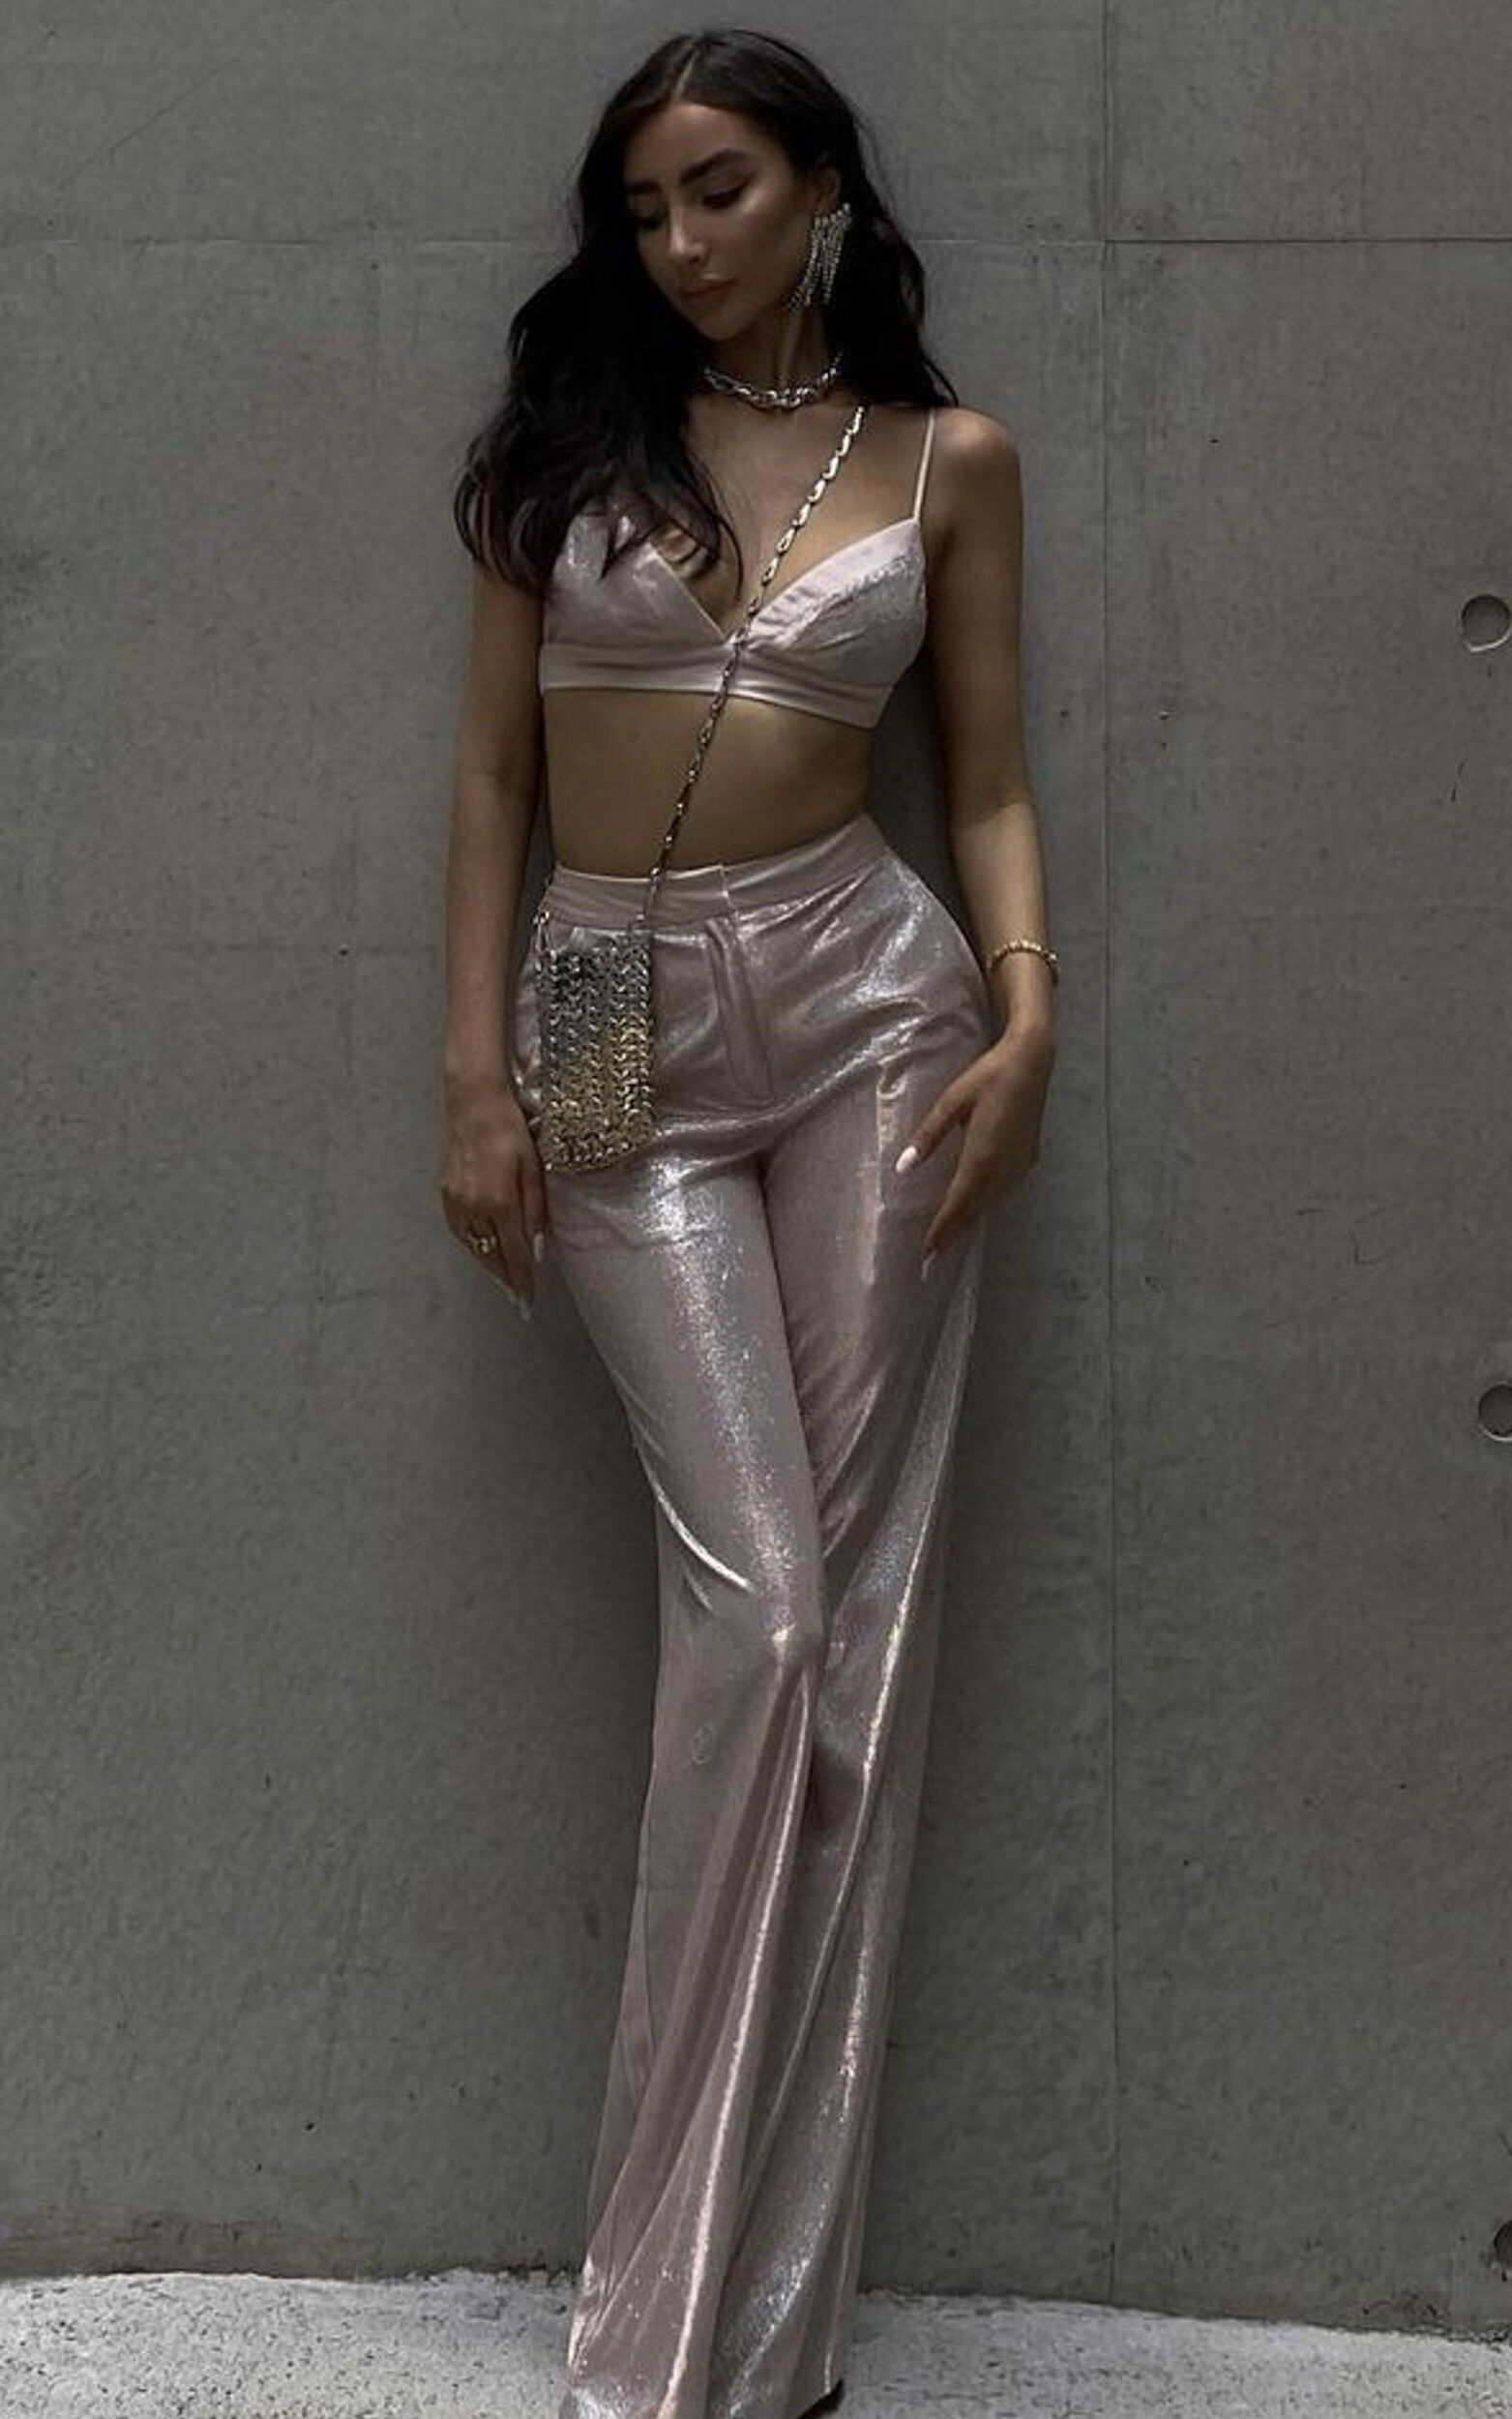 Sharleez Pants - Glitter High Waisted Tailored Wide Leg Pants in Rose Gold - 06, RSG2